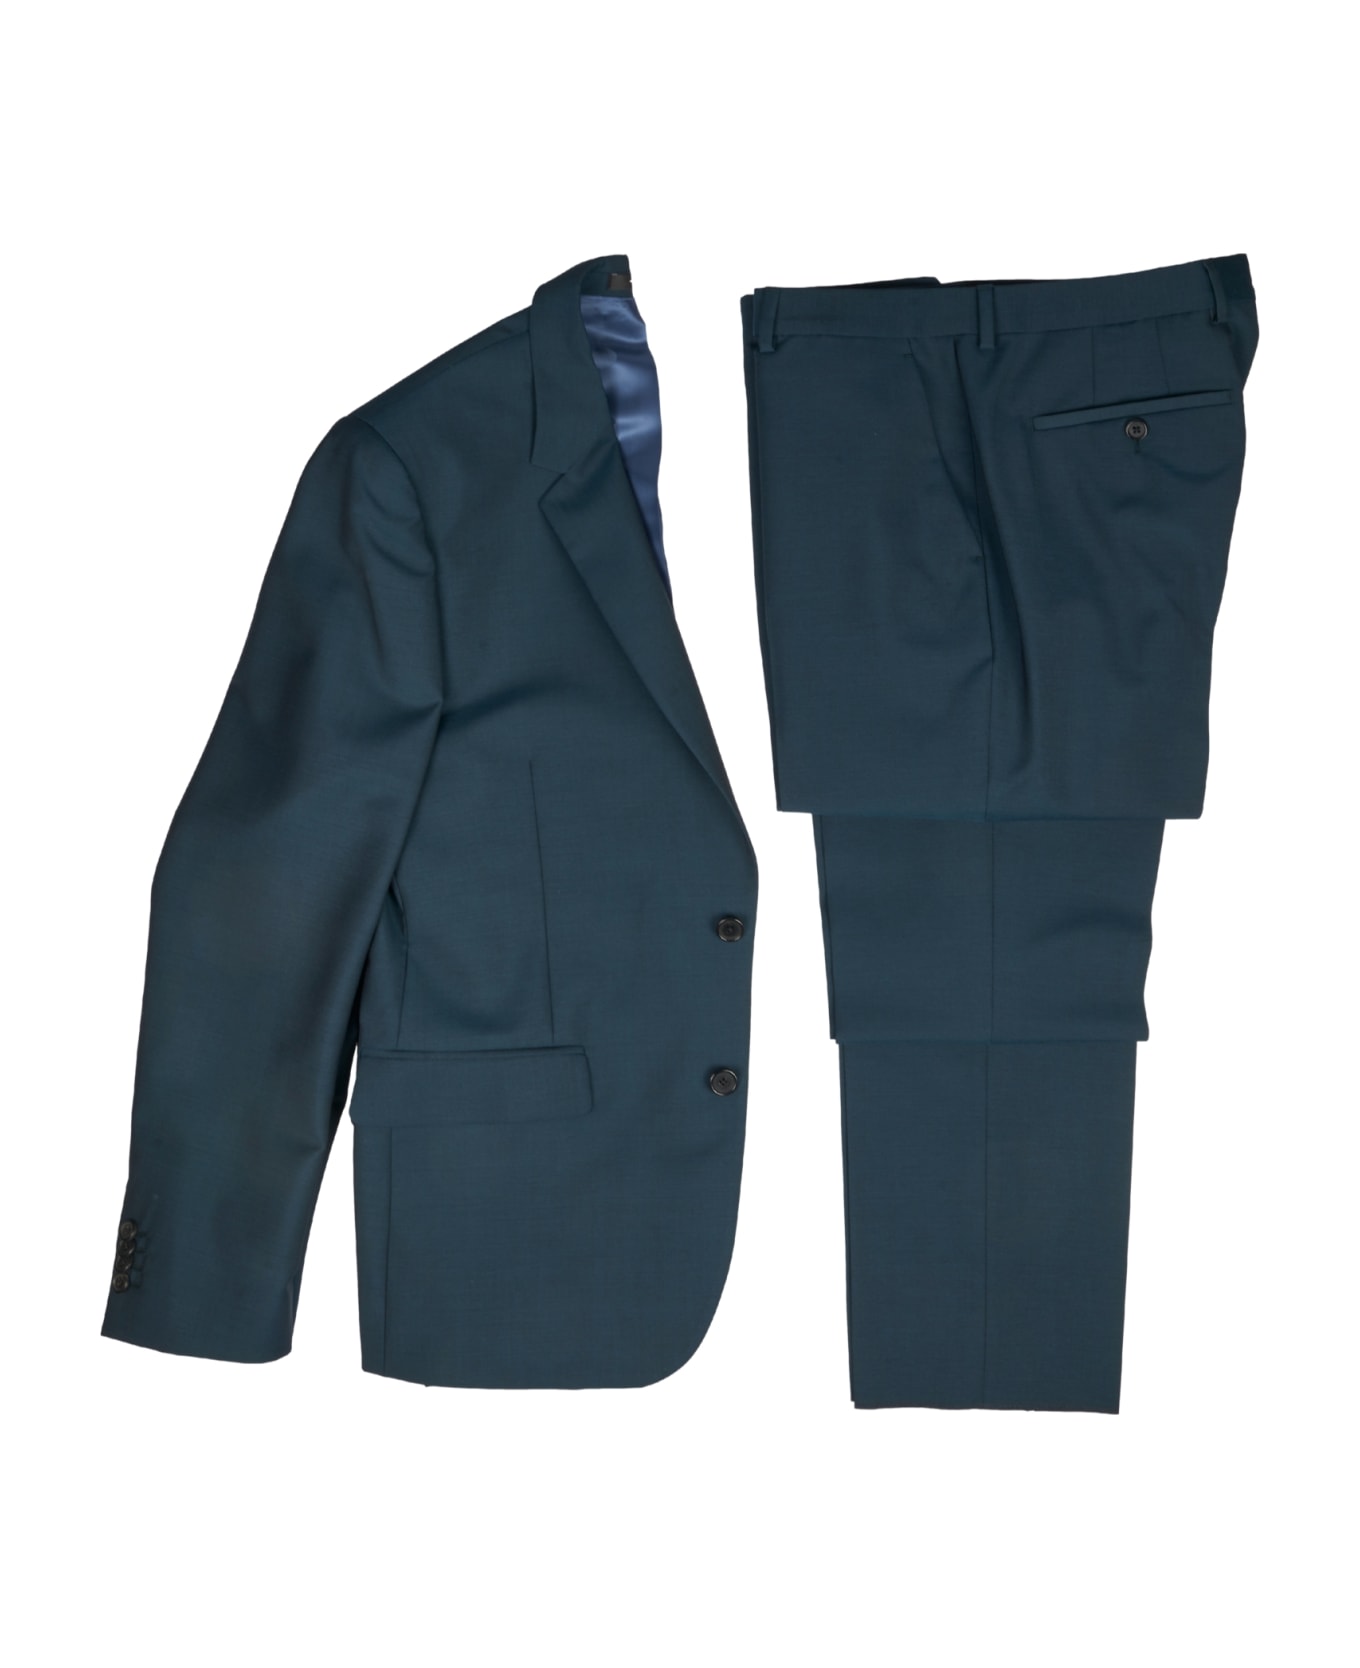 Paul Smith Suit - Green